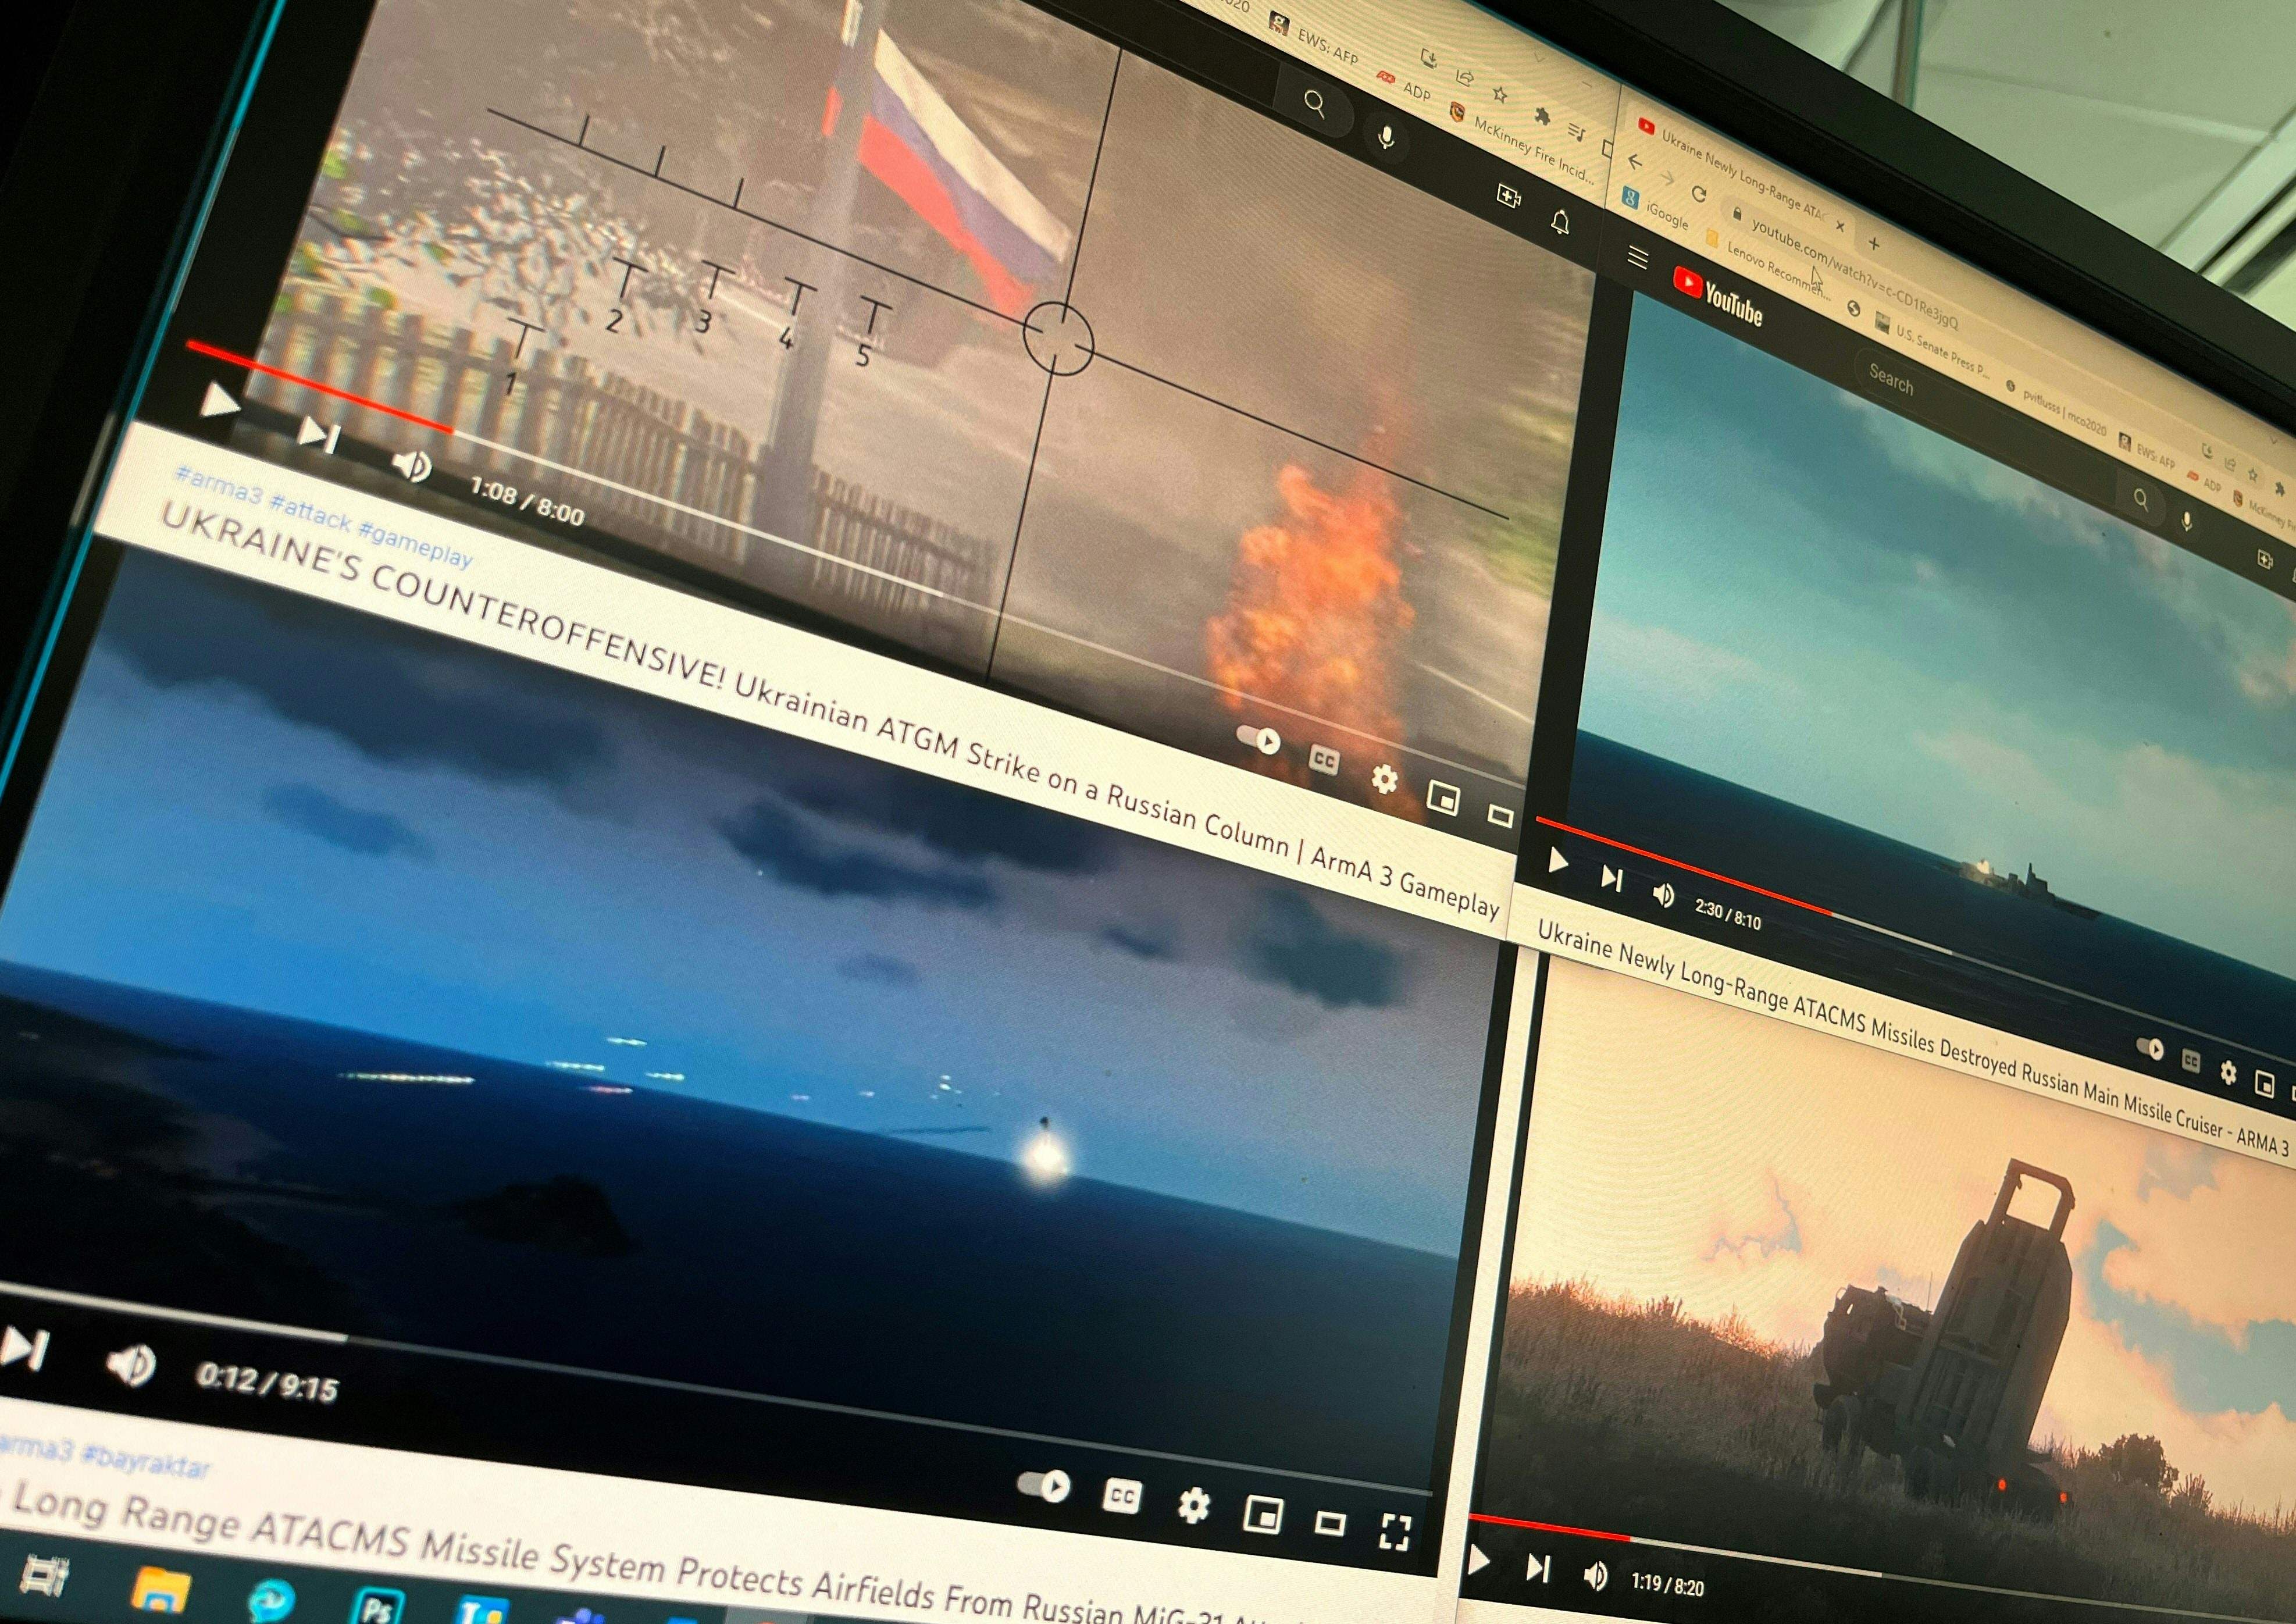 Arma 3 studio says game footage is being used to spread fake news about the  Ukraine war